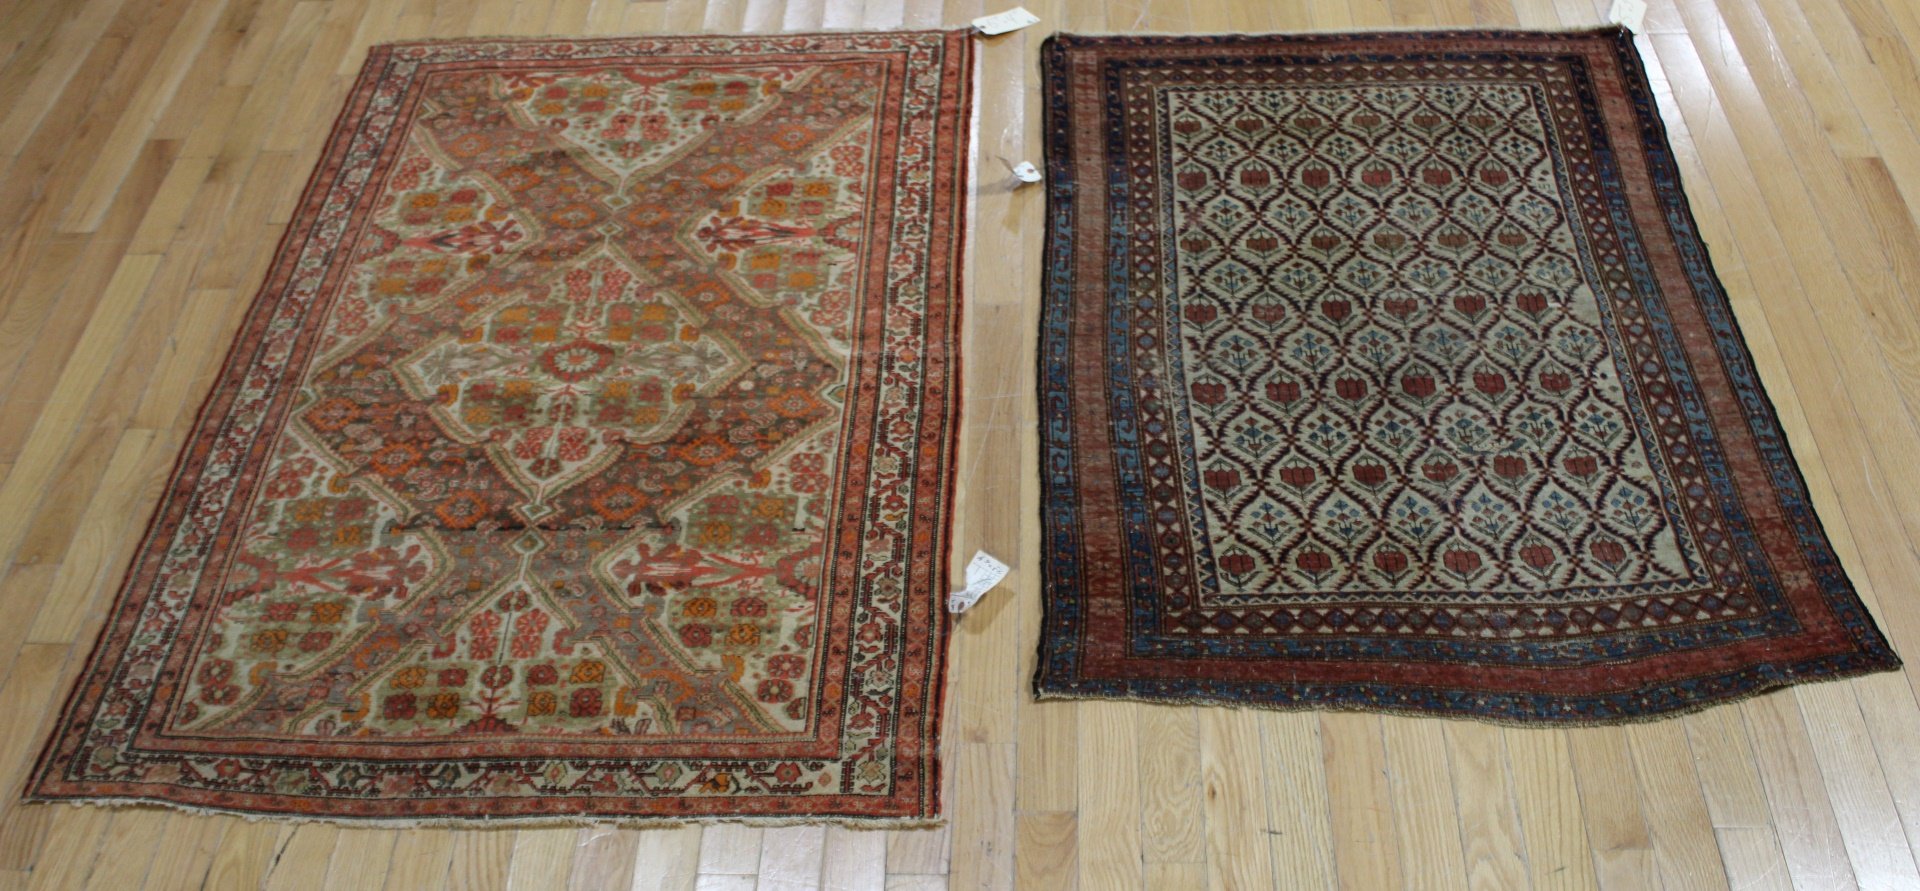 2 ANTIQUE AND FINELY HAND WOVEN 3bac27